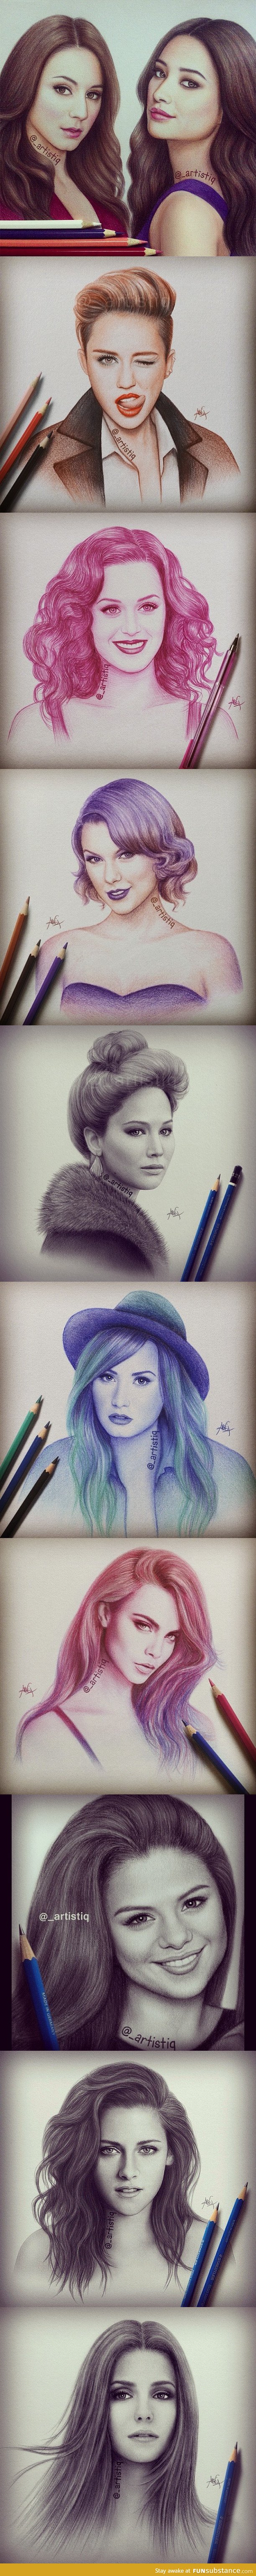 Celebrity Drawings by Artistiq